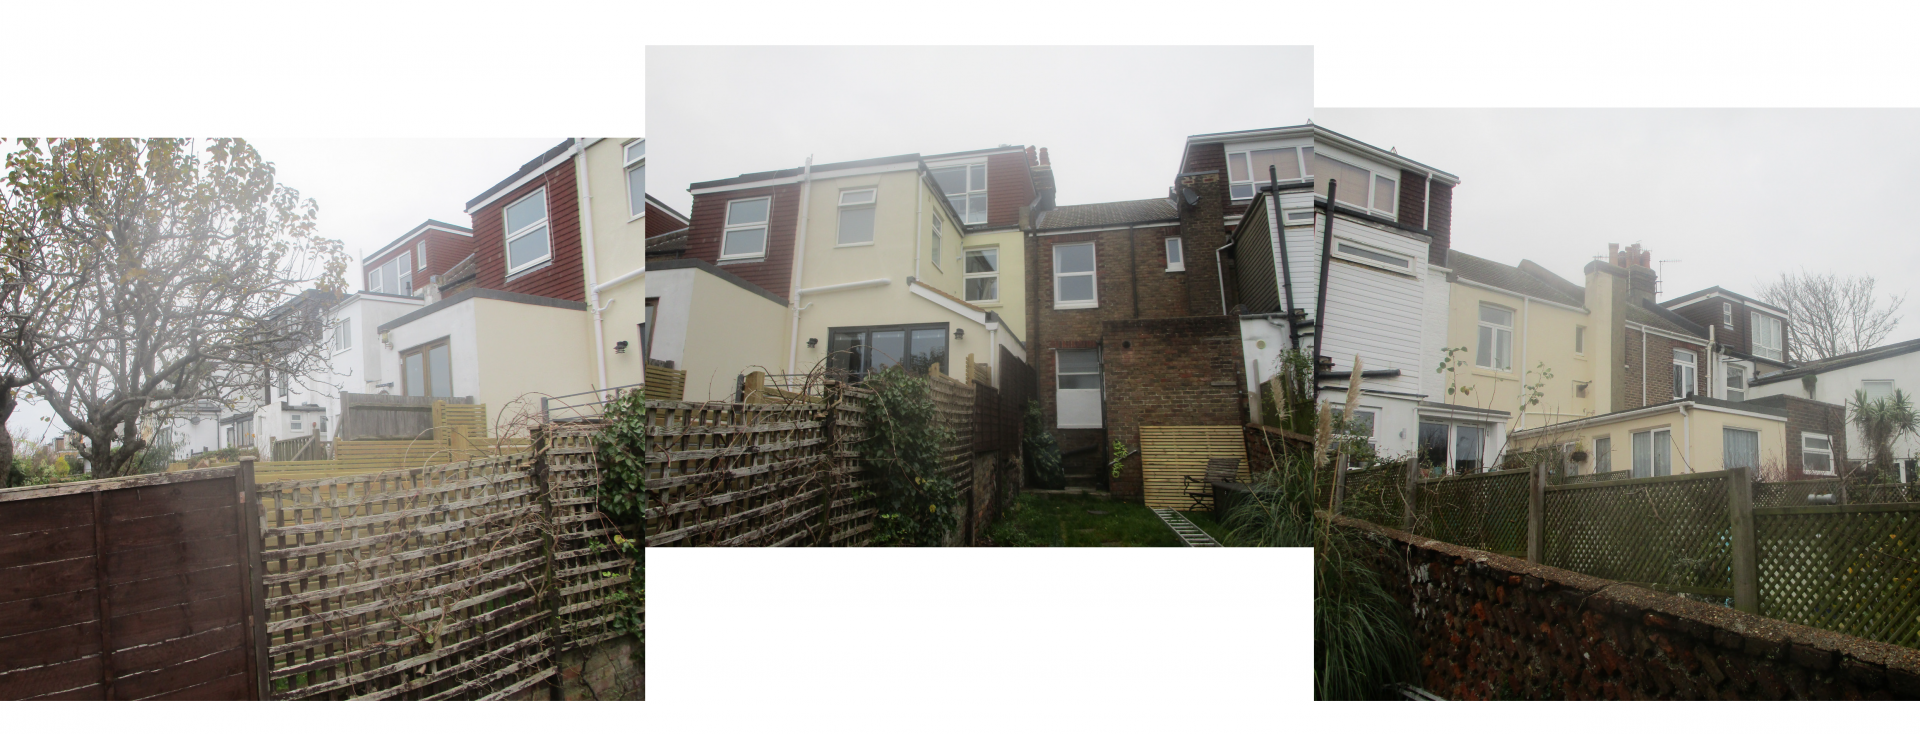 An Image showing the garden of an infill project in Brighton